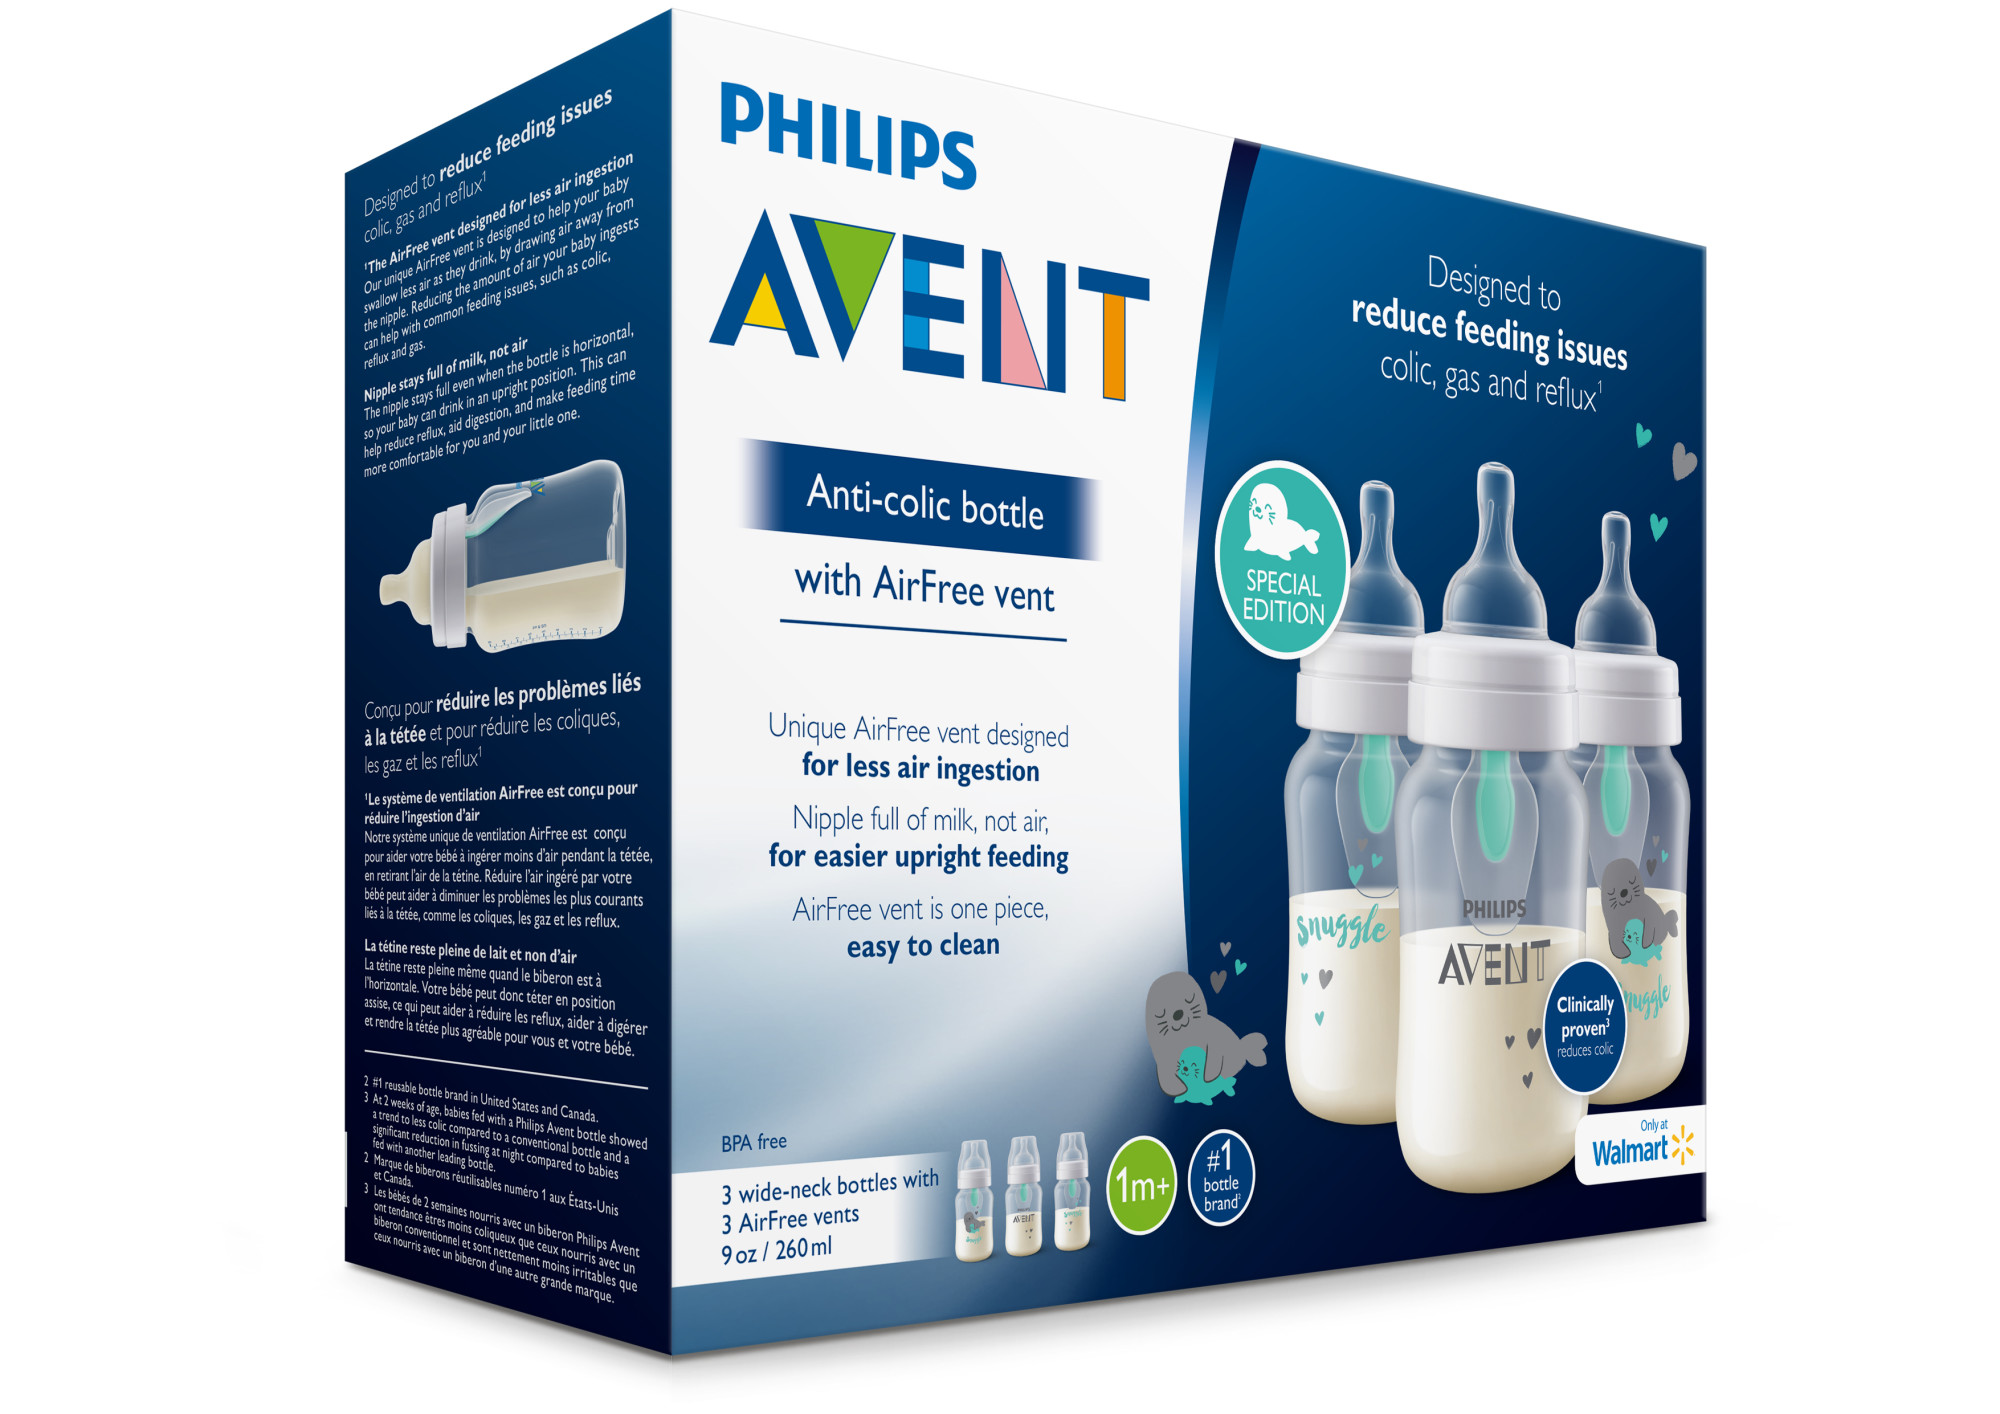 Philips Avent Anti-colic Baby Bottle with AirFree Vent with Seal Design, 9oz, 3pk, SCF408/34 - image 5 of 6